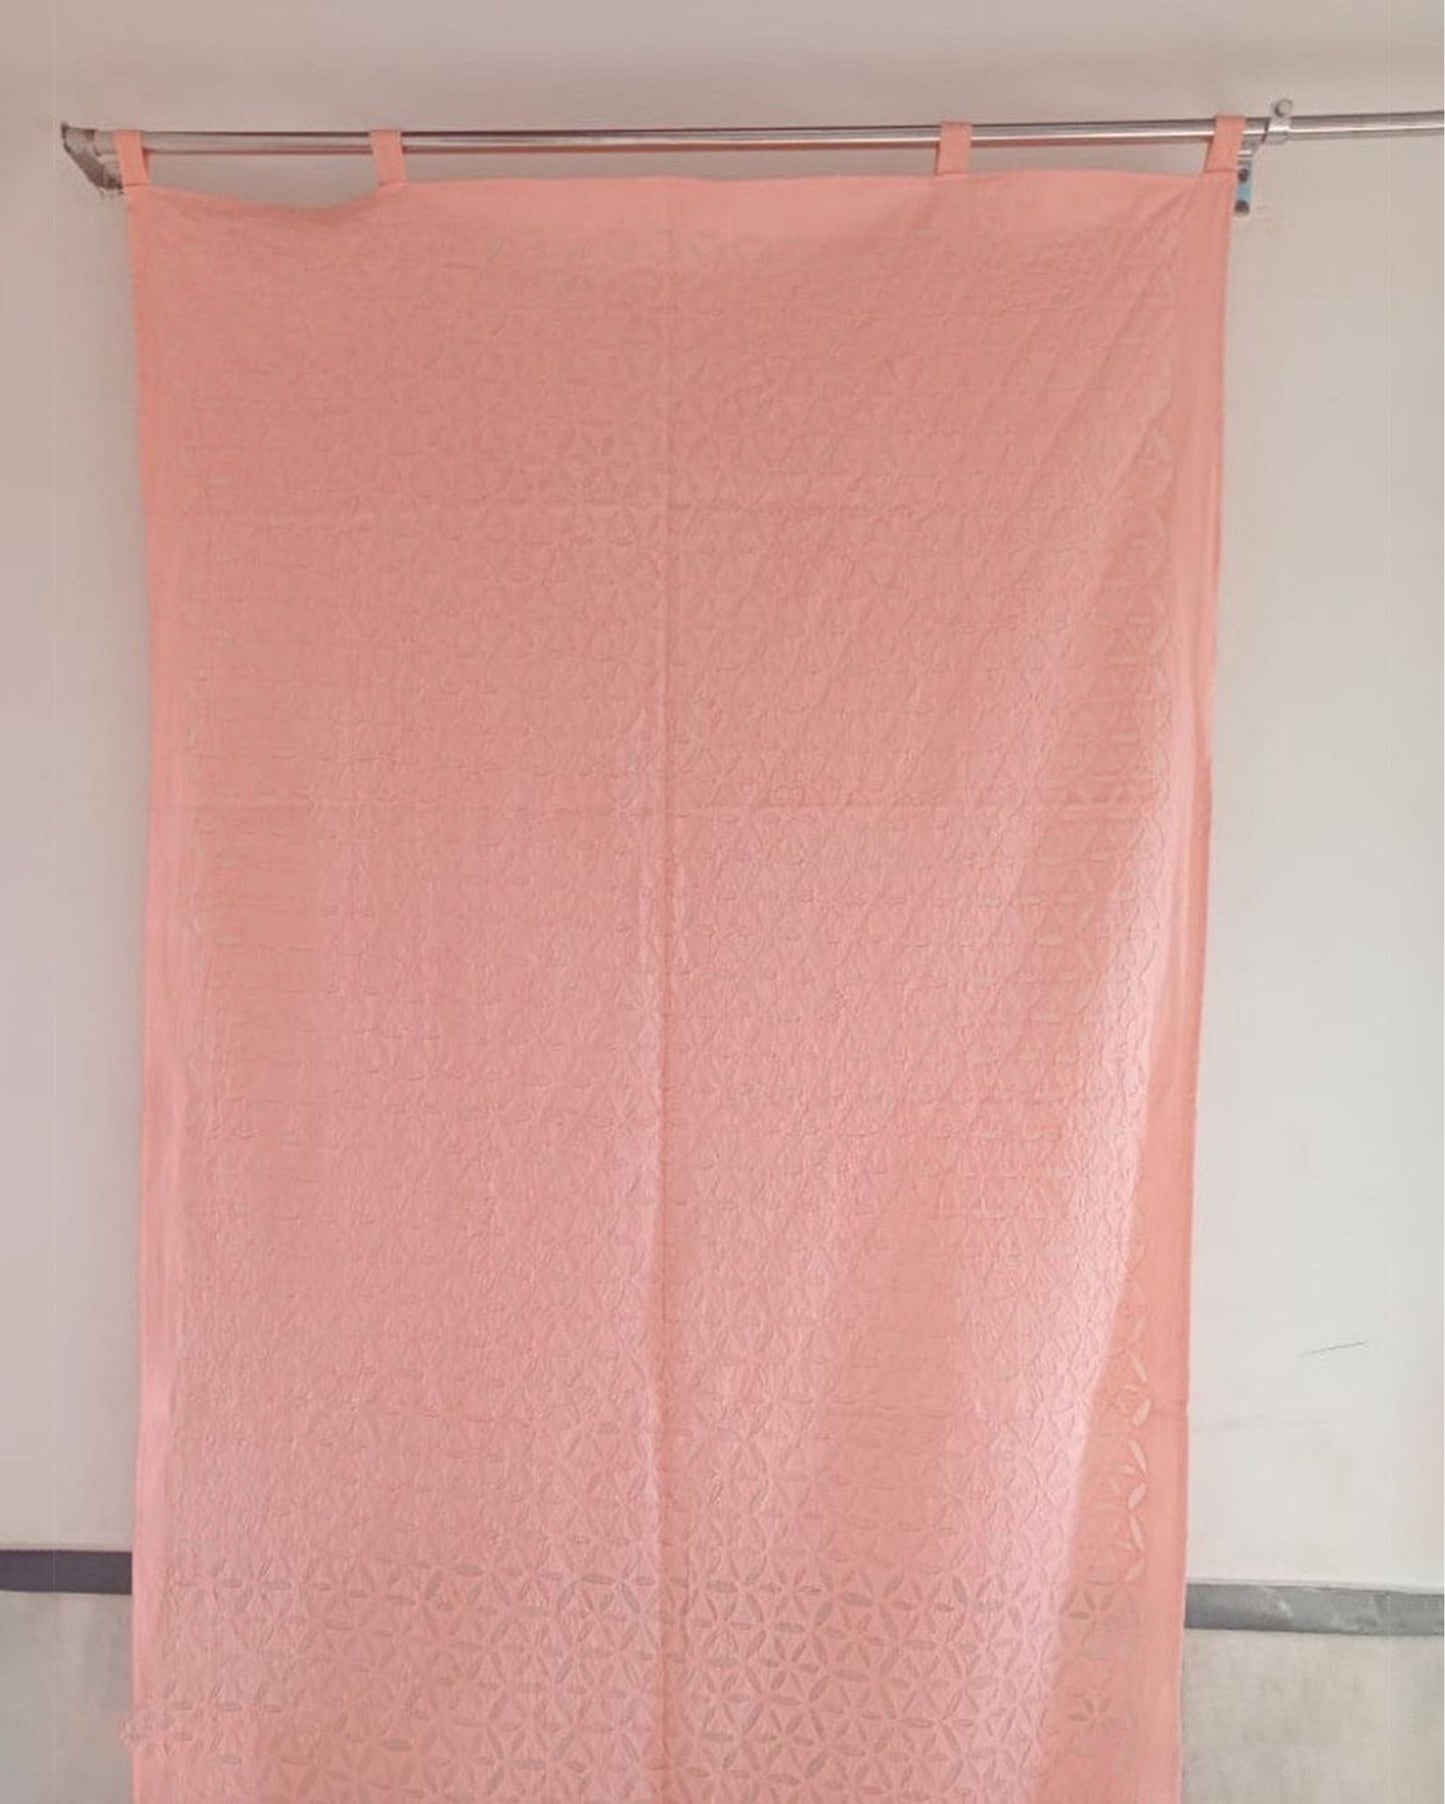 6334-Applique Work Wall Hanging Pink Curtain
Size - 45"X100"